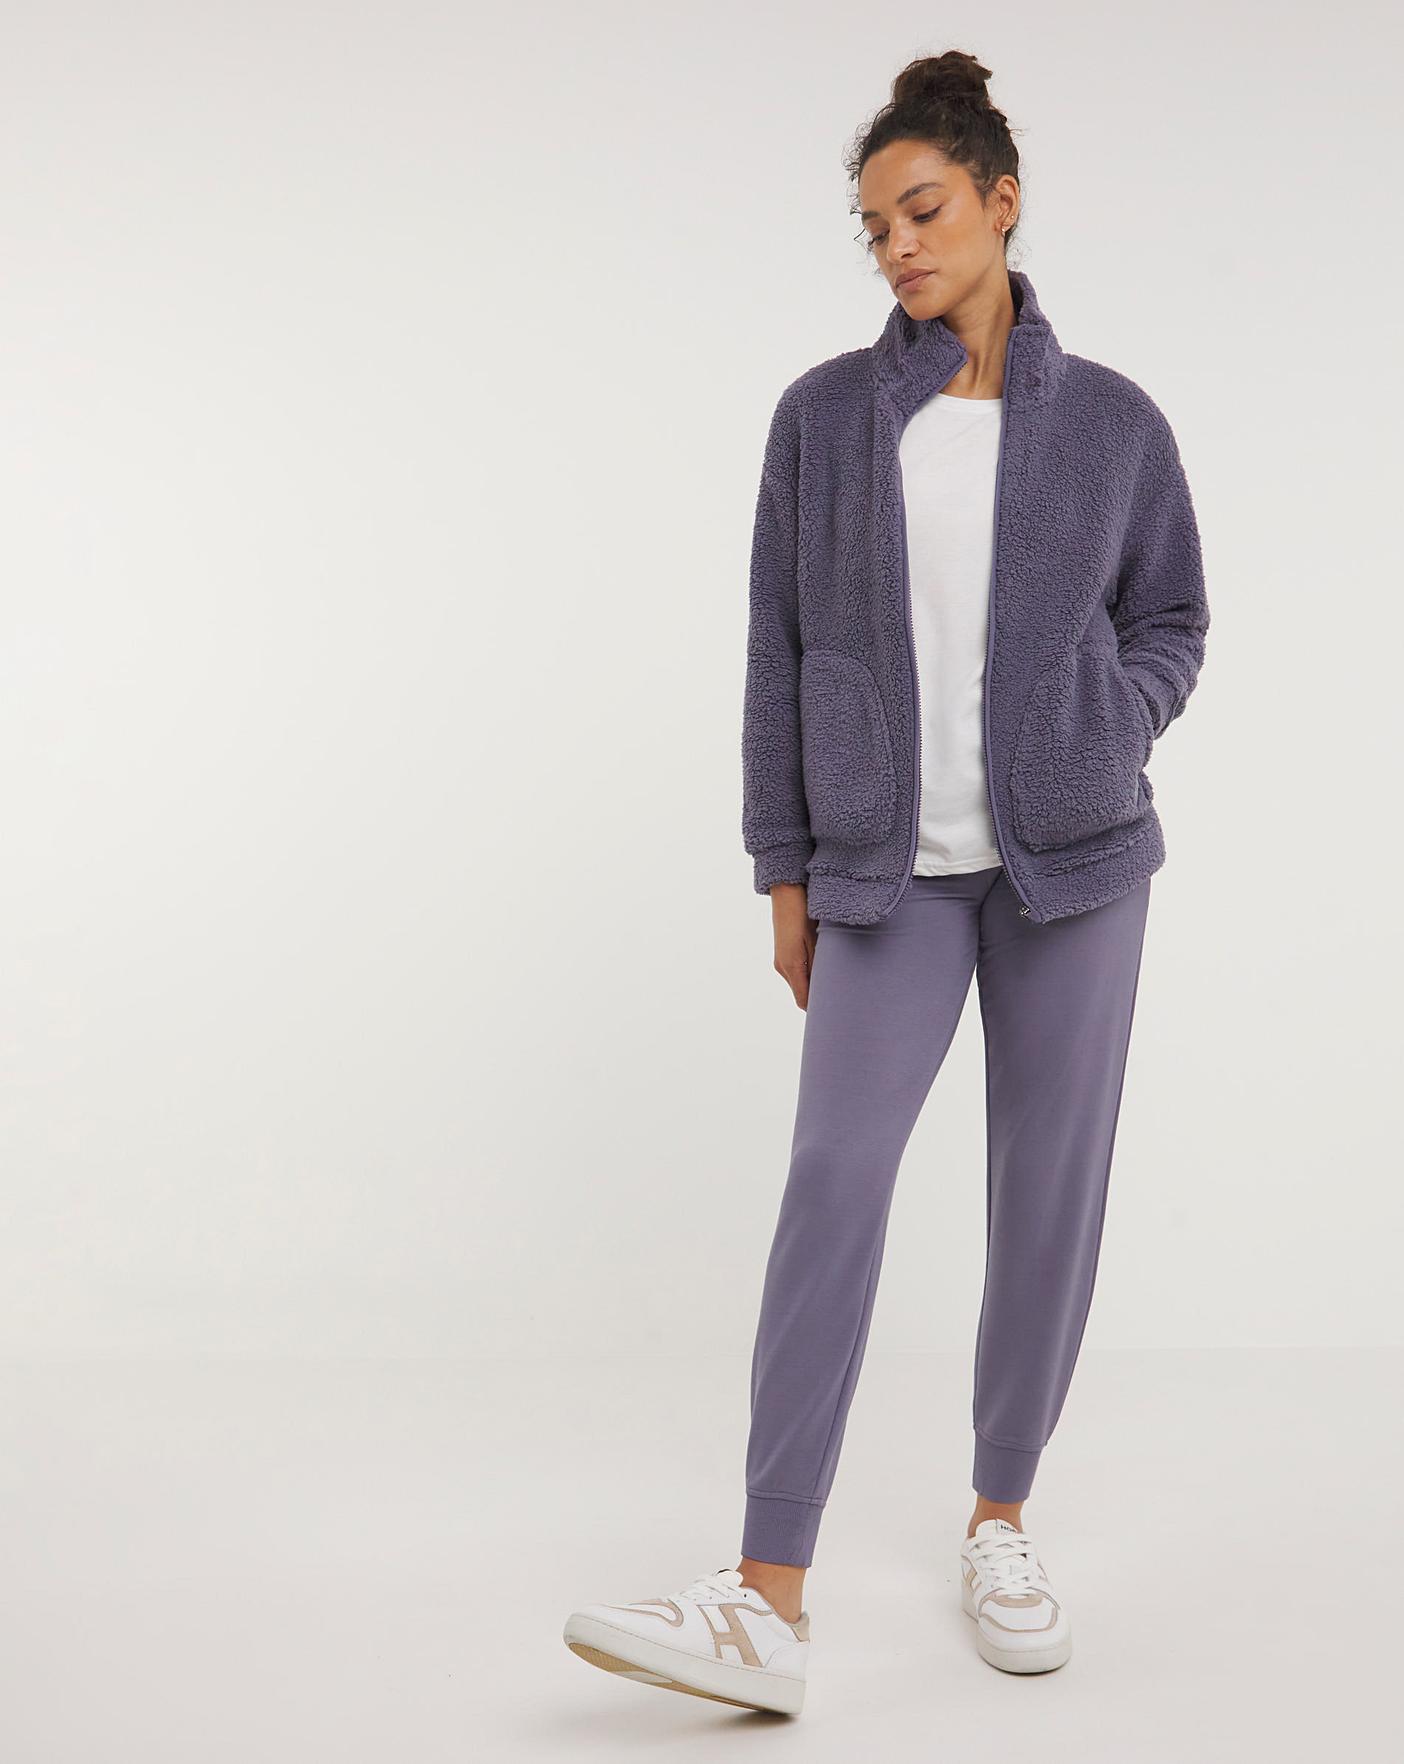 SKECHLUXE RESFUL JOGGER